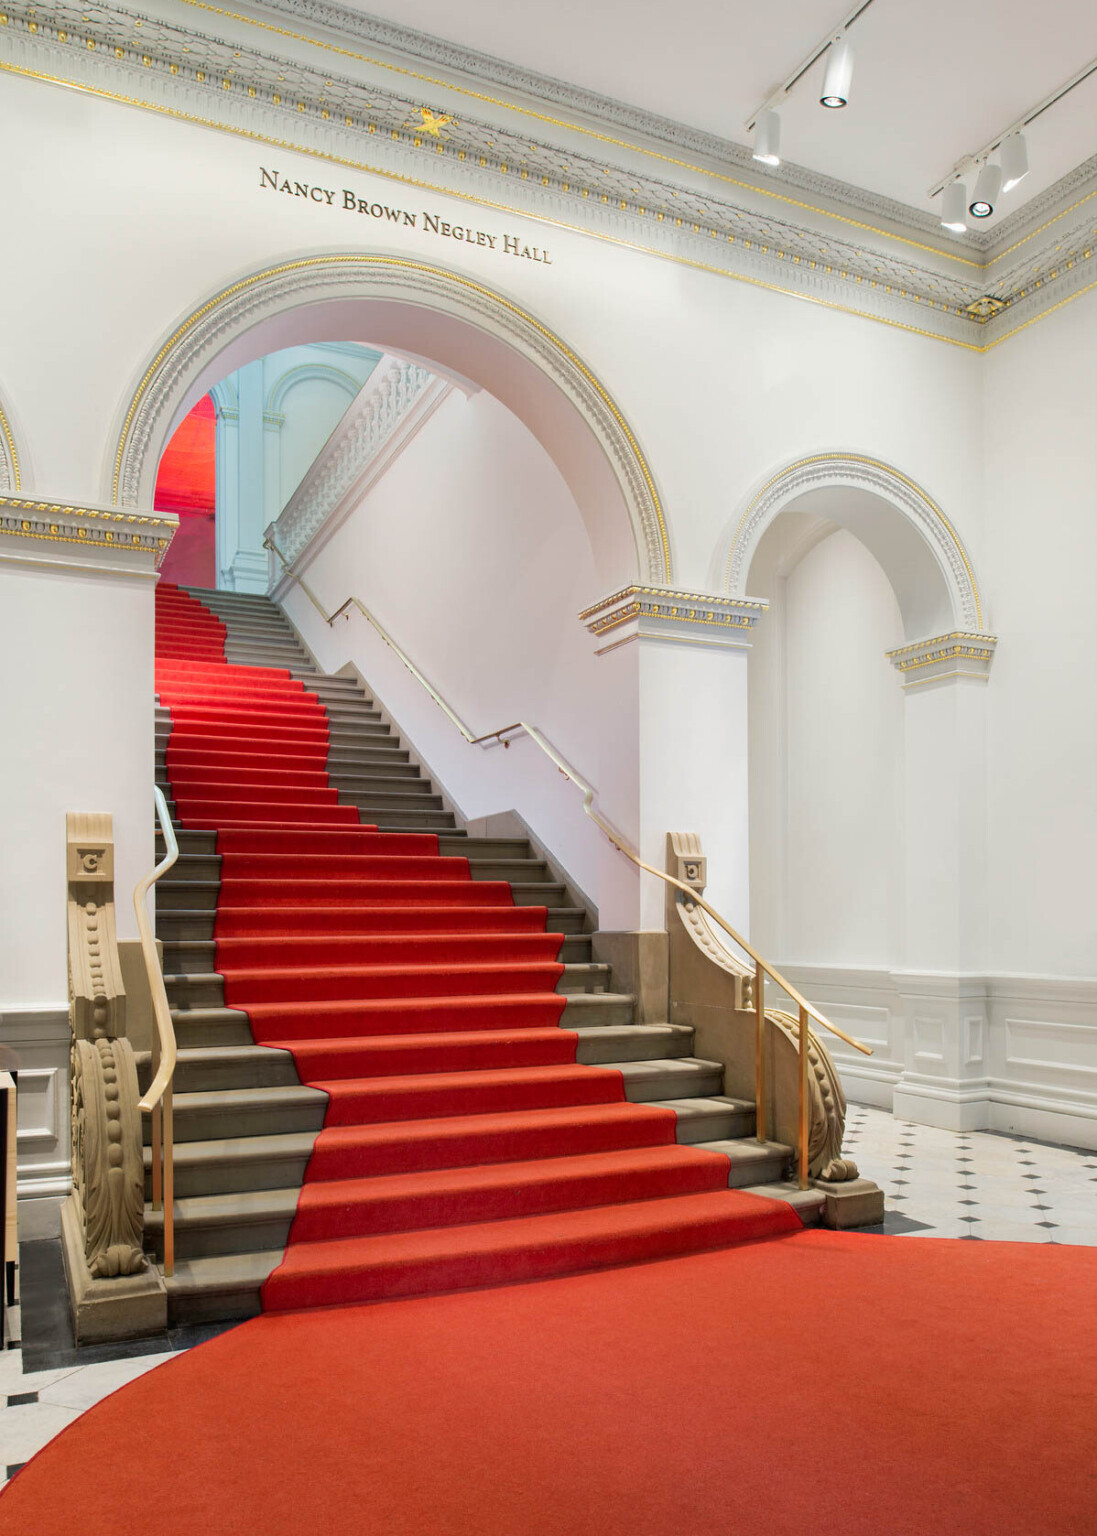 Grand staircase with curved red carpet that widens at base of stairs. Stairs pass through a white arch with gold molding